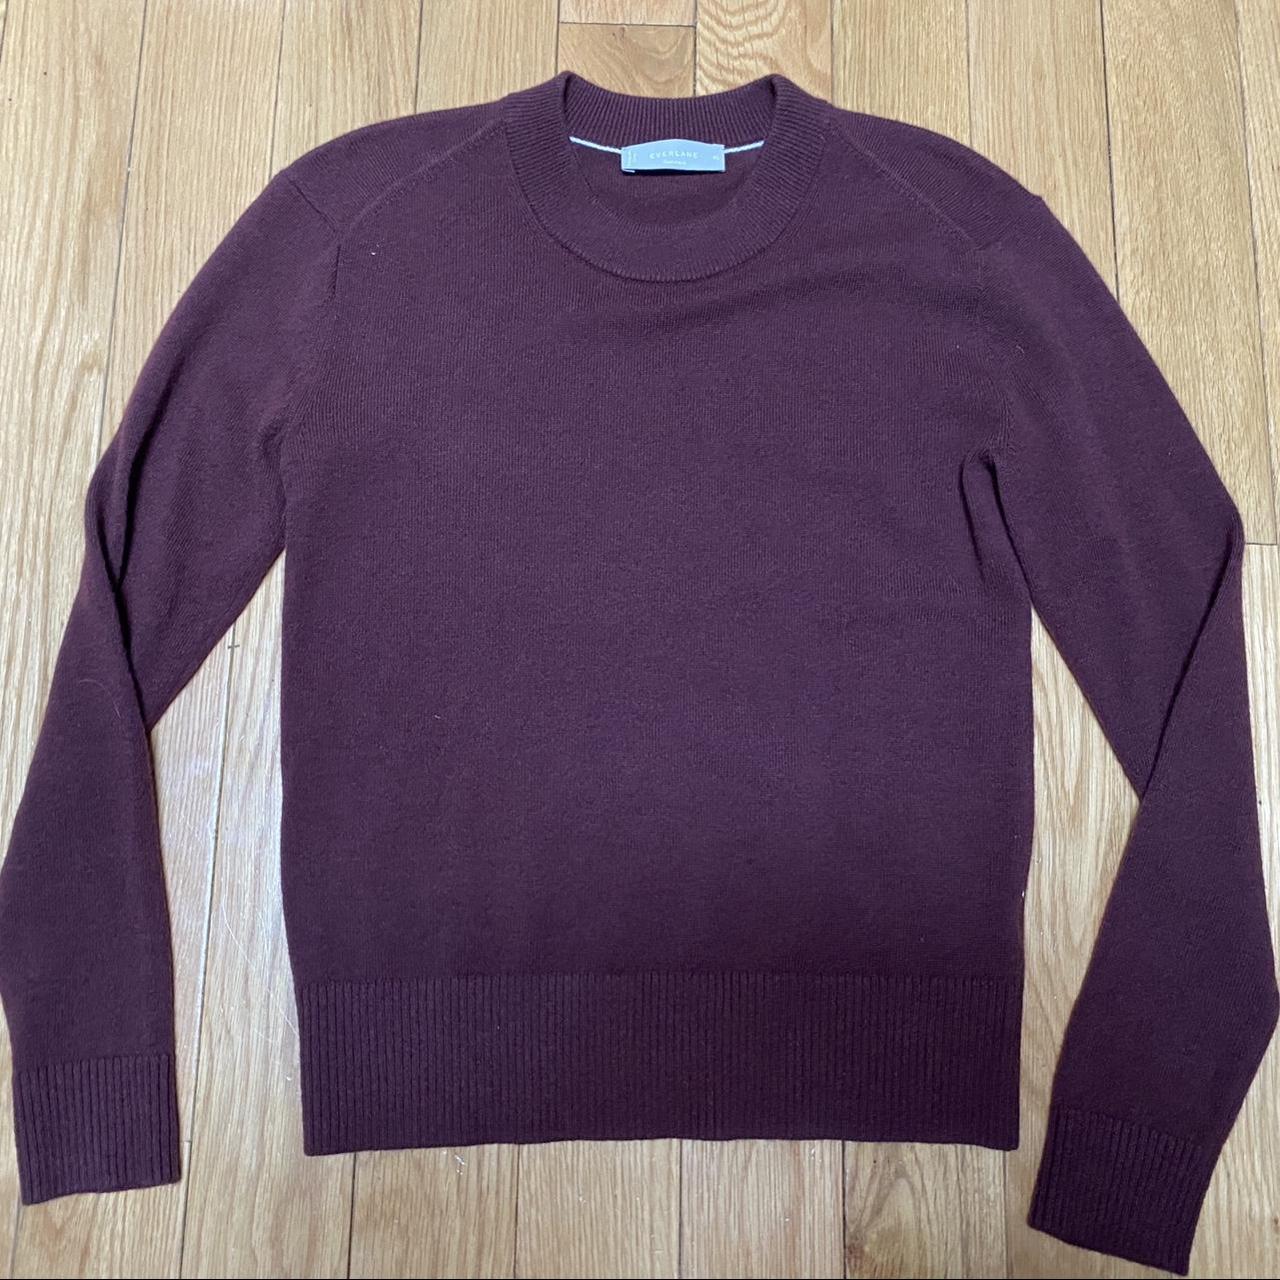 Everlane burgundy cashmere sweater - new without... - Depop